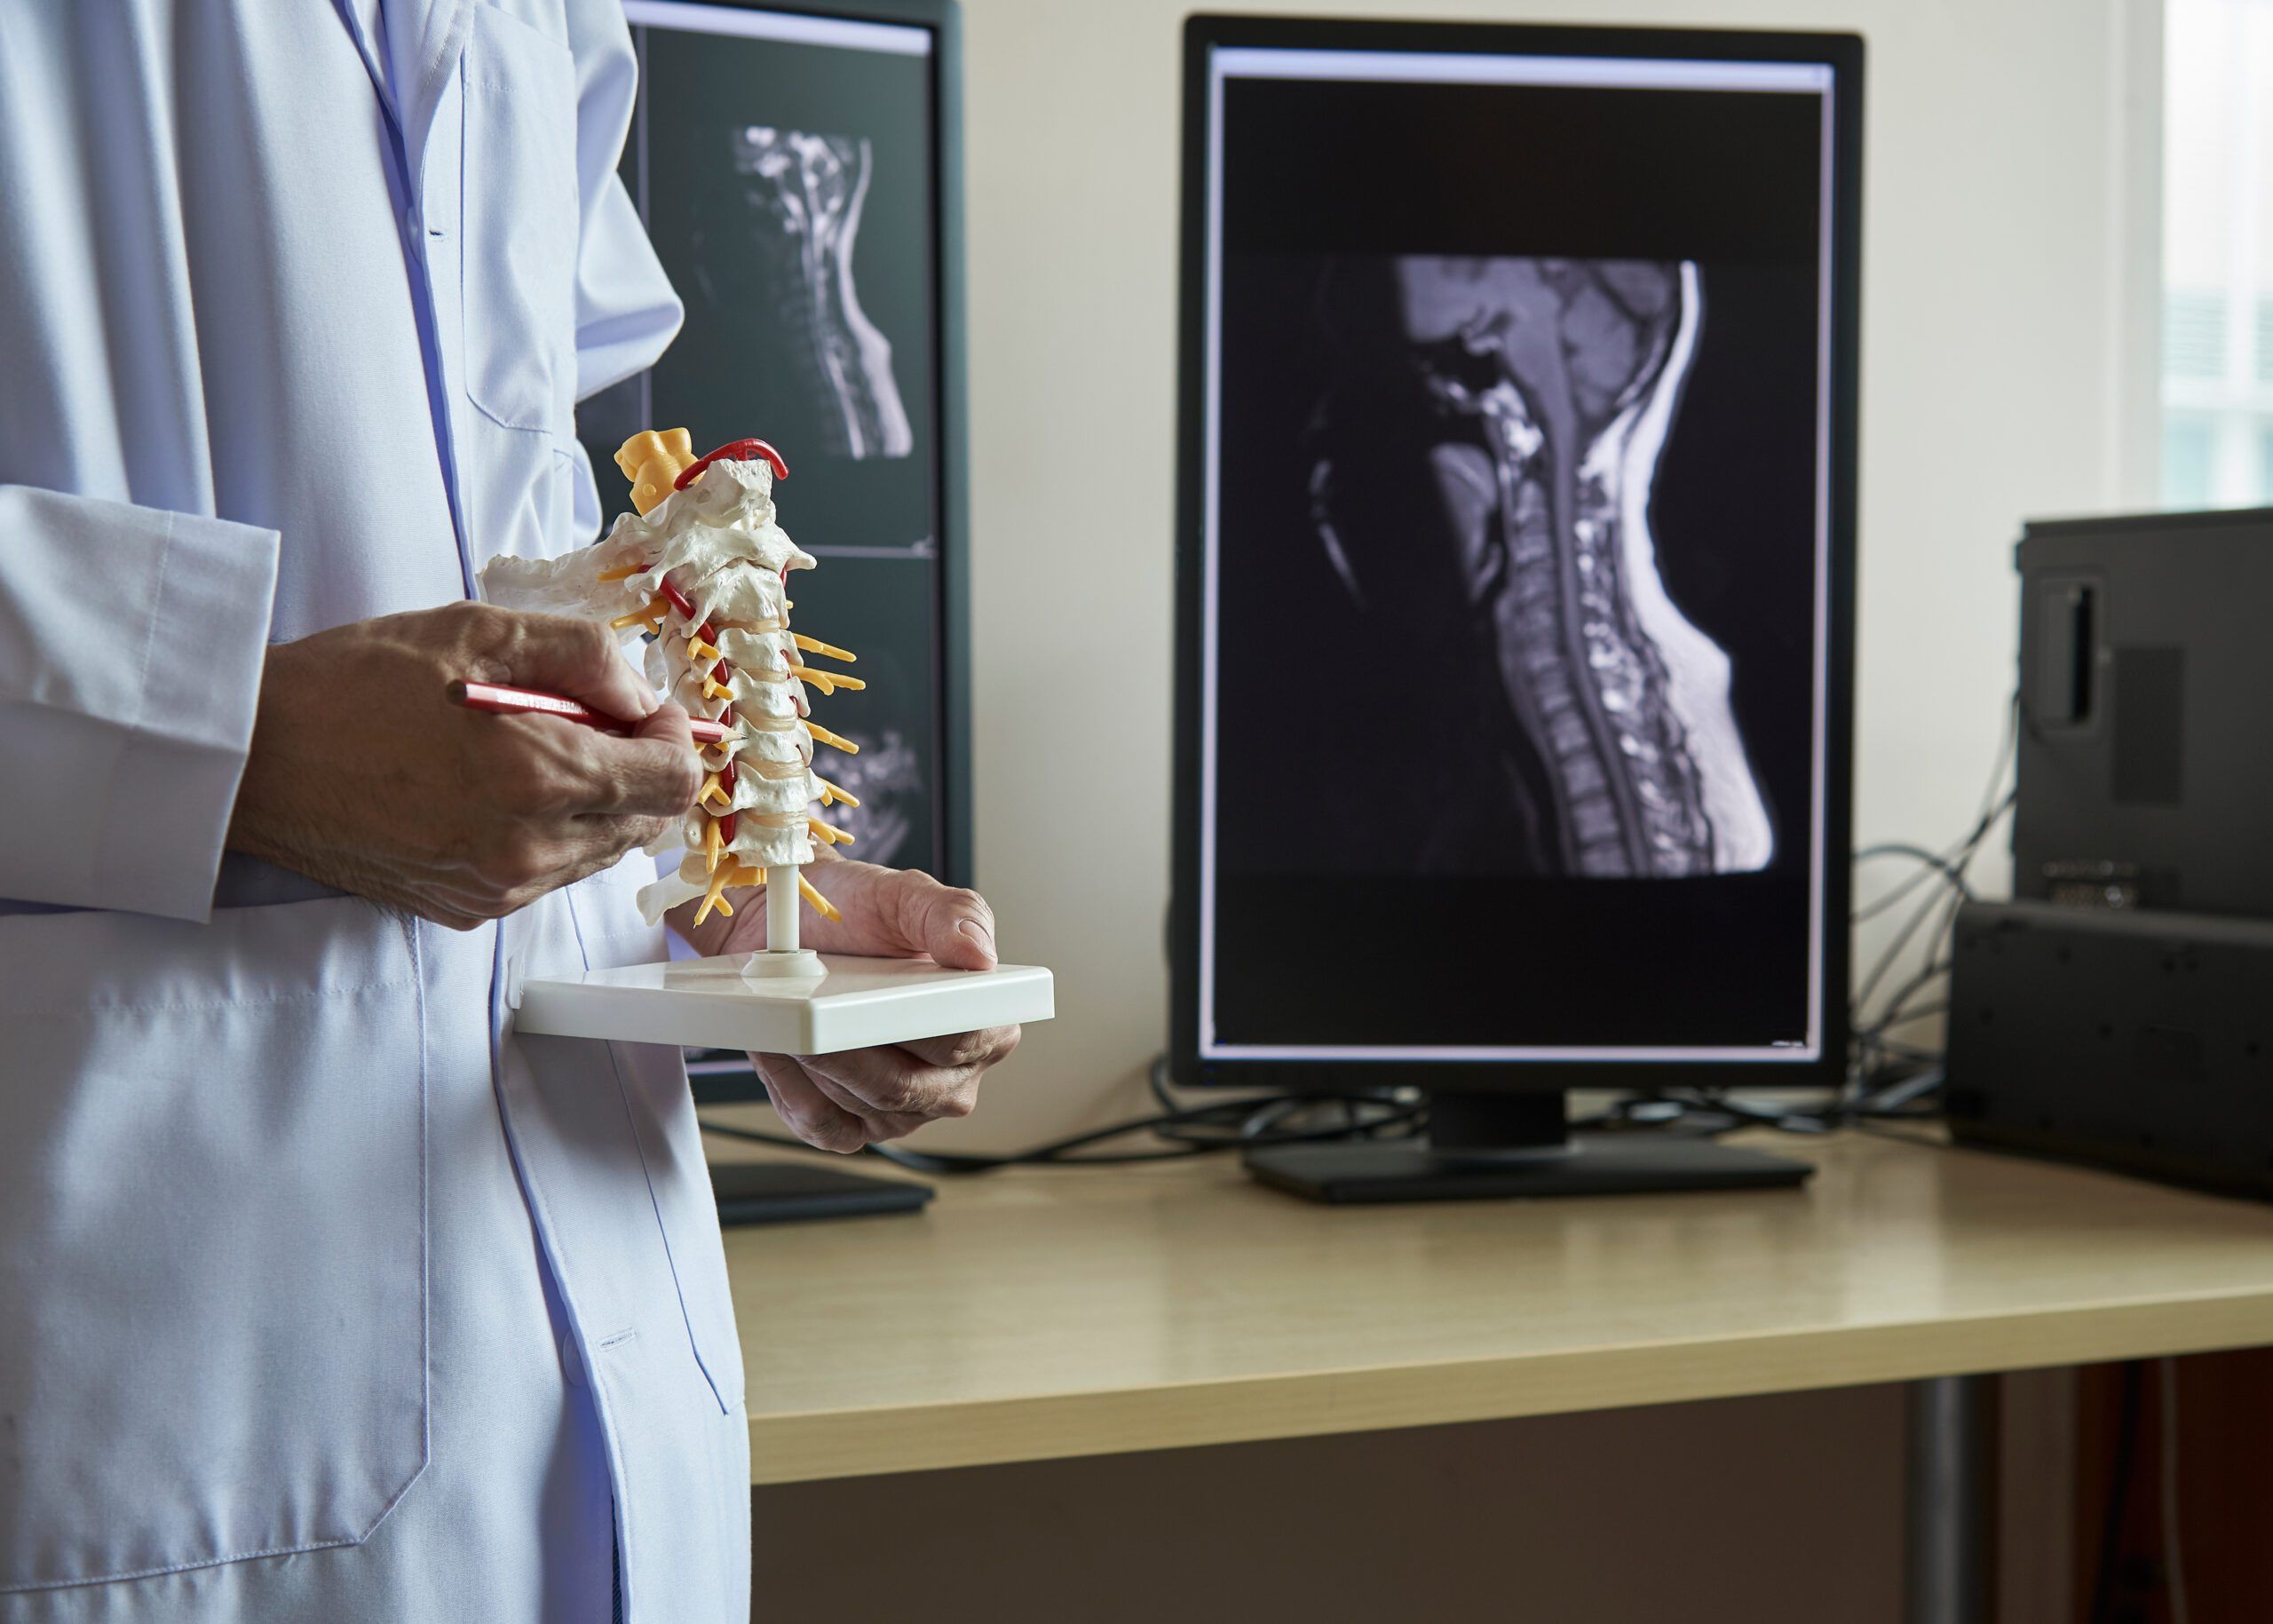 A neurosurgeon pointing at anatomy of human cervical spine model in medical office. Lumbar spine x-ray in computer screen on background.